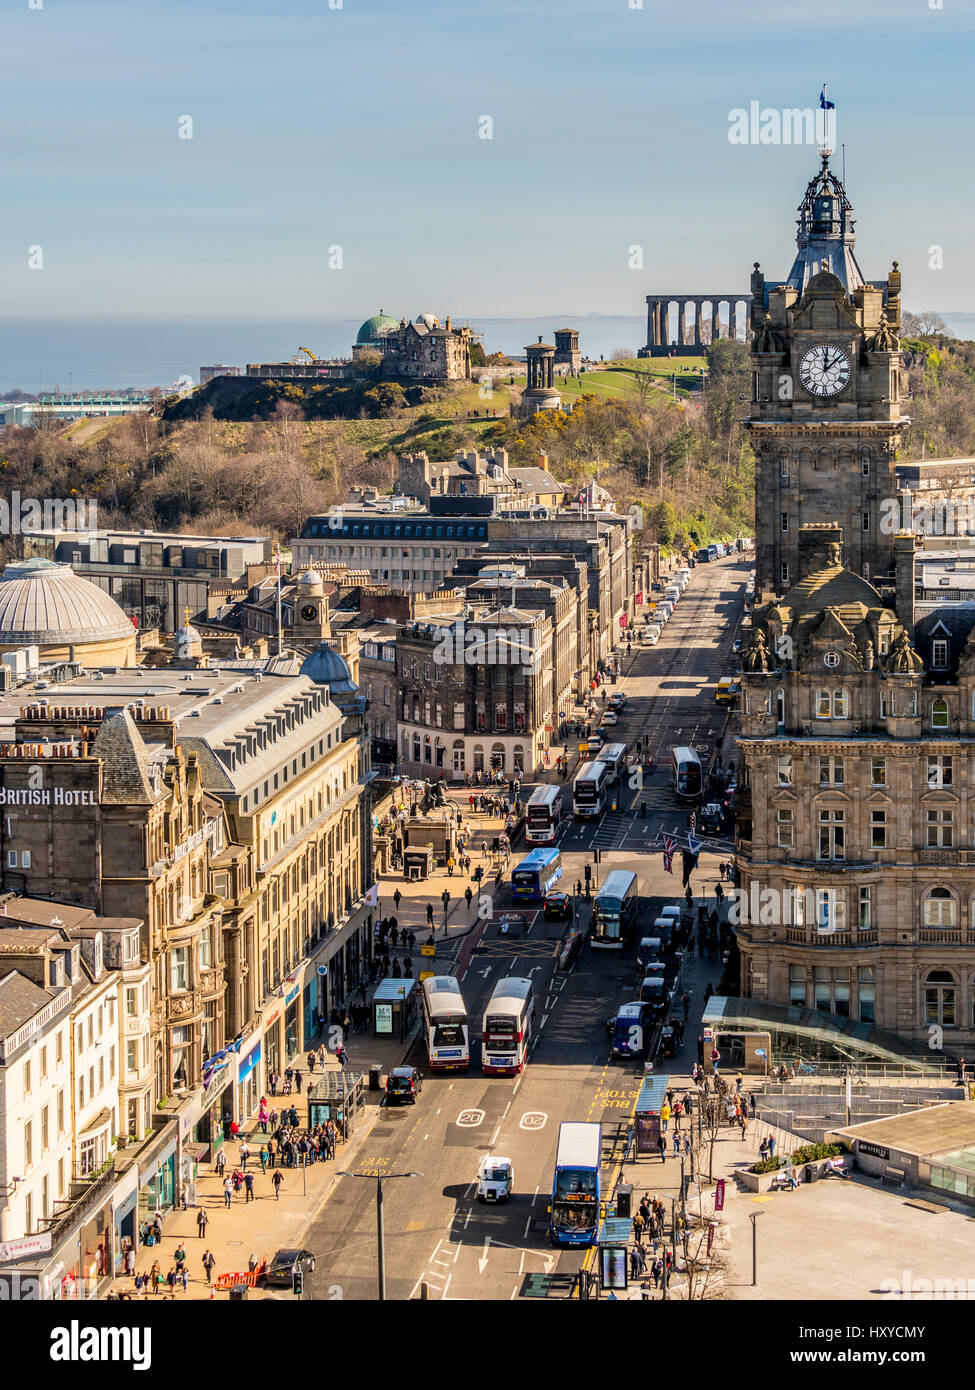 Aerial view looking East along Princes Street towards the Balmoral Hotel with the Scottish National Monument on Calton Hill in the distance. Edinburgh. Stock Photo